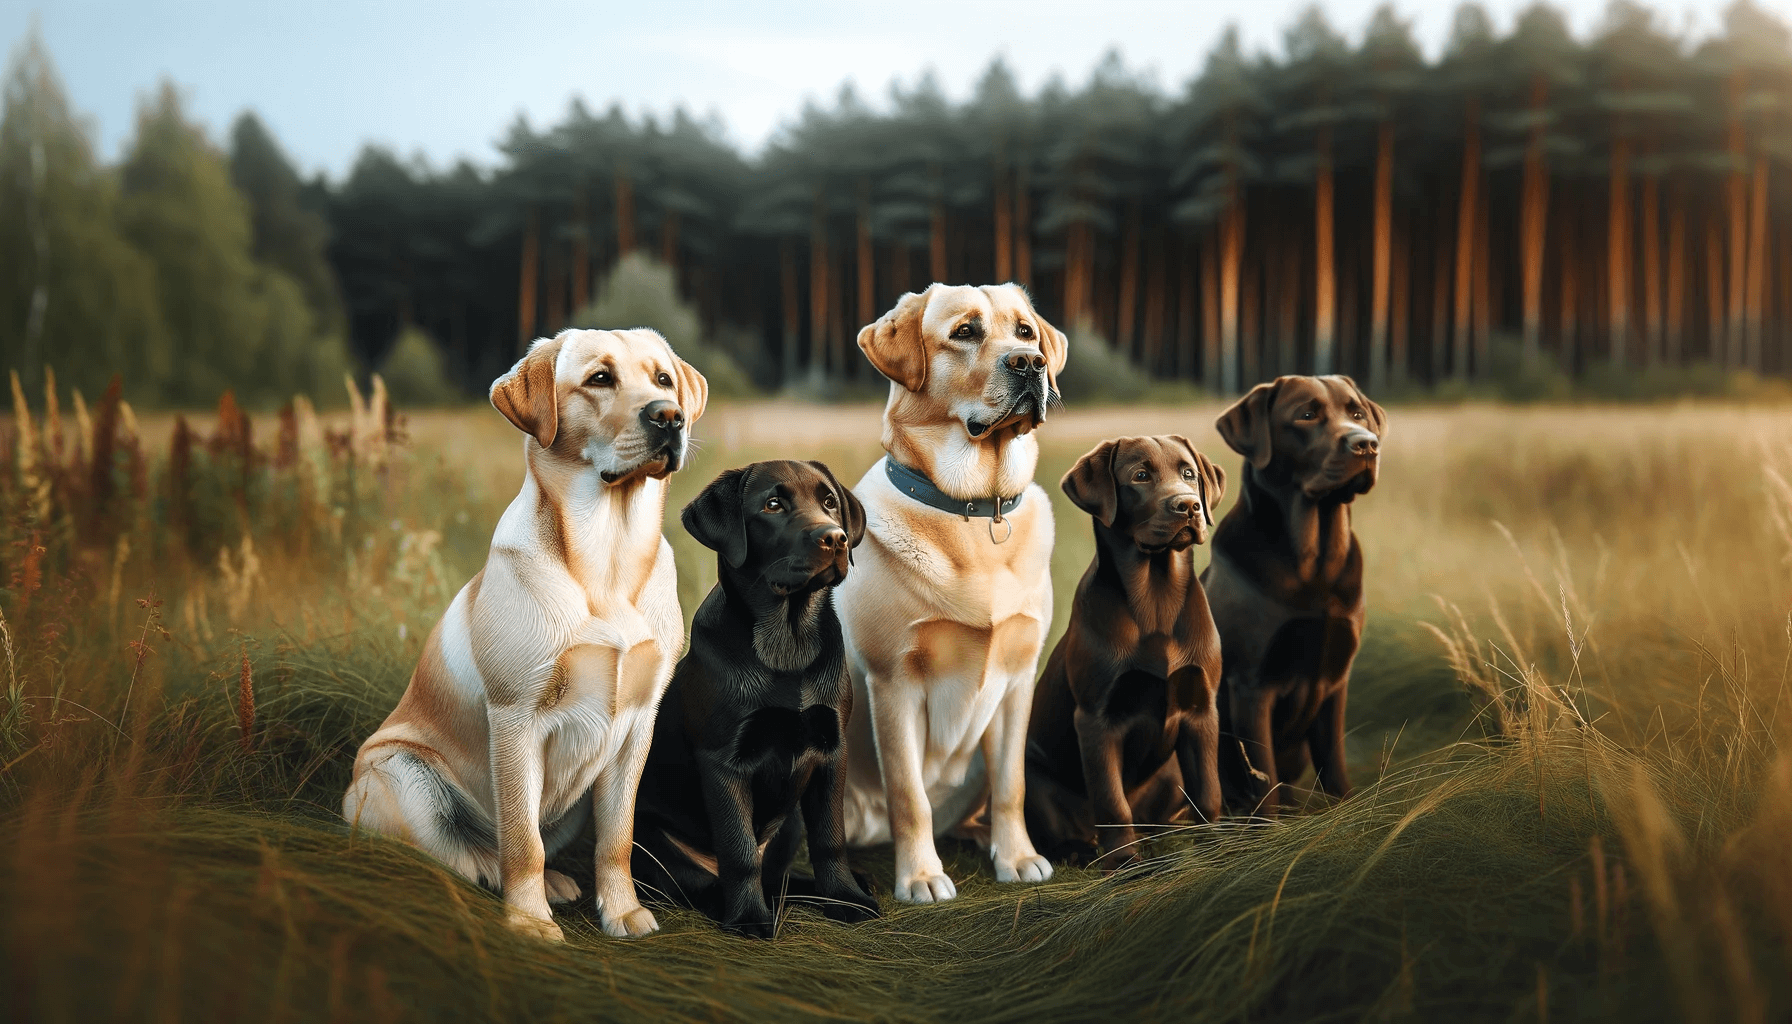 Pack of Labrador Retrievers (Labradorii) of different colors - yellow, black, and chocolate - sitting together in a grassy field.